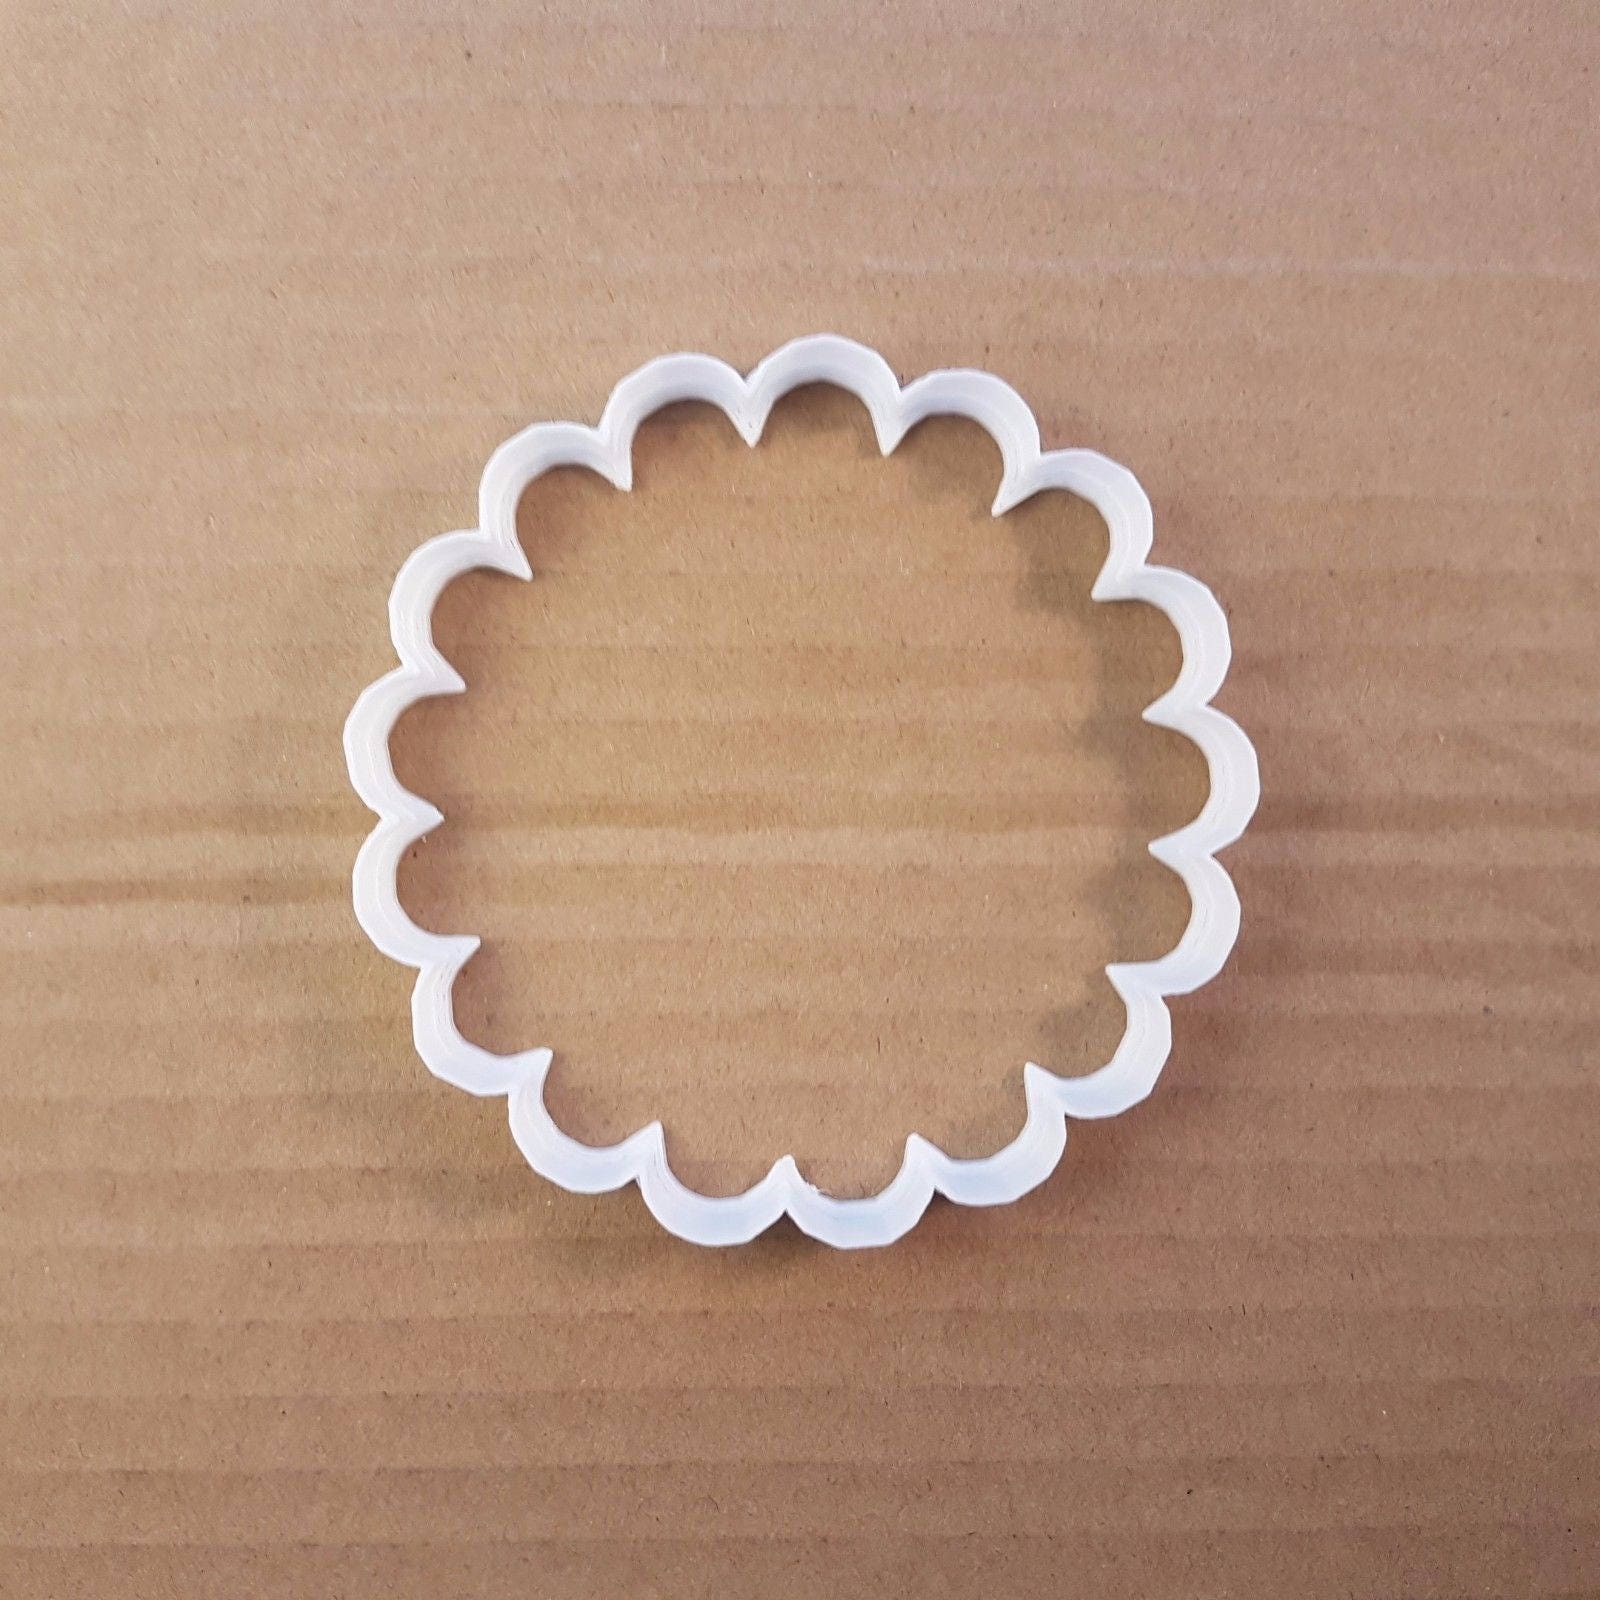 Shell Beach Circle Sea Shape Cookie Cutter Dough Biscuit Pastry Fondant Sharp Flower Stencil Scone Plant